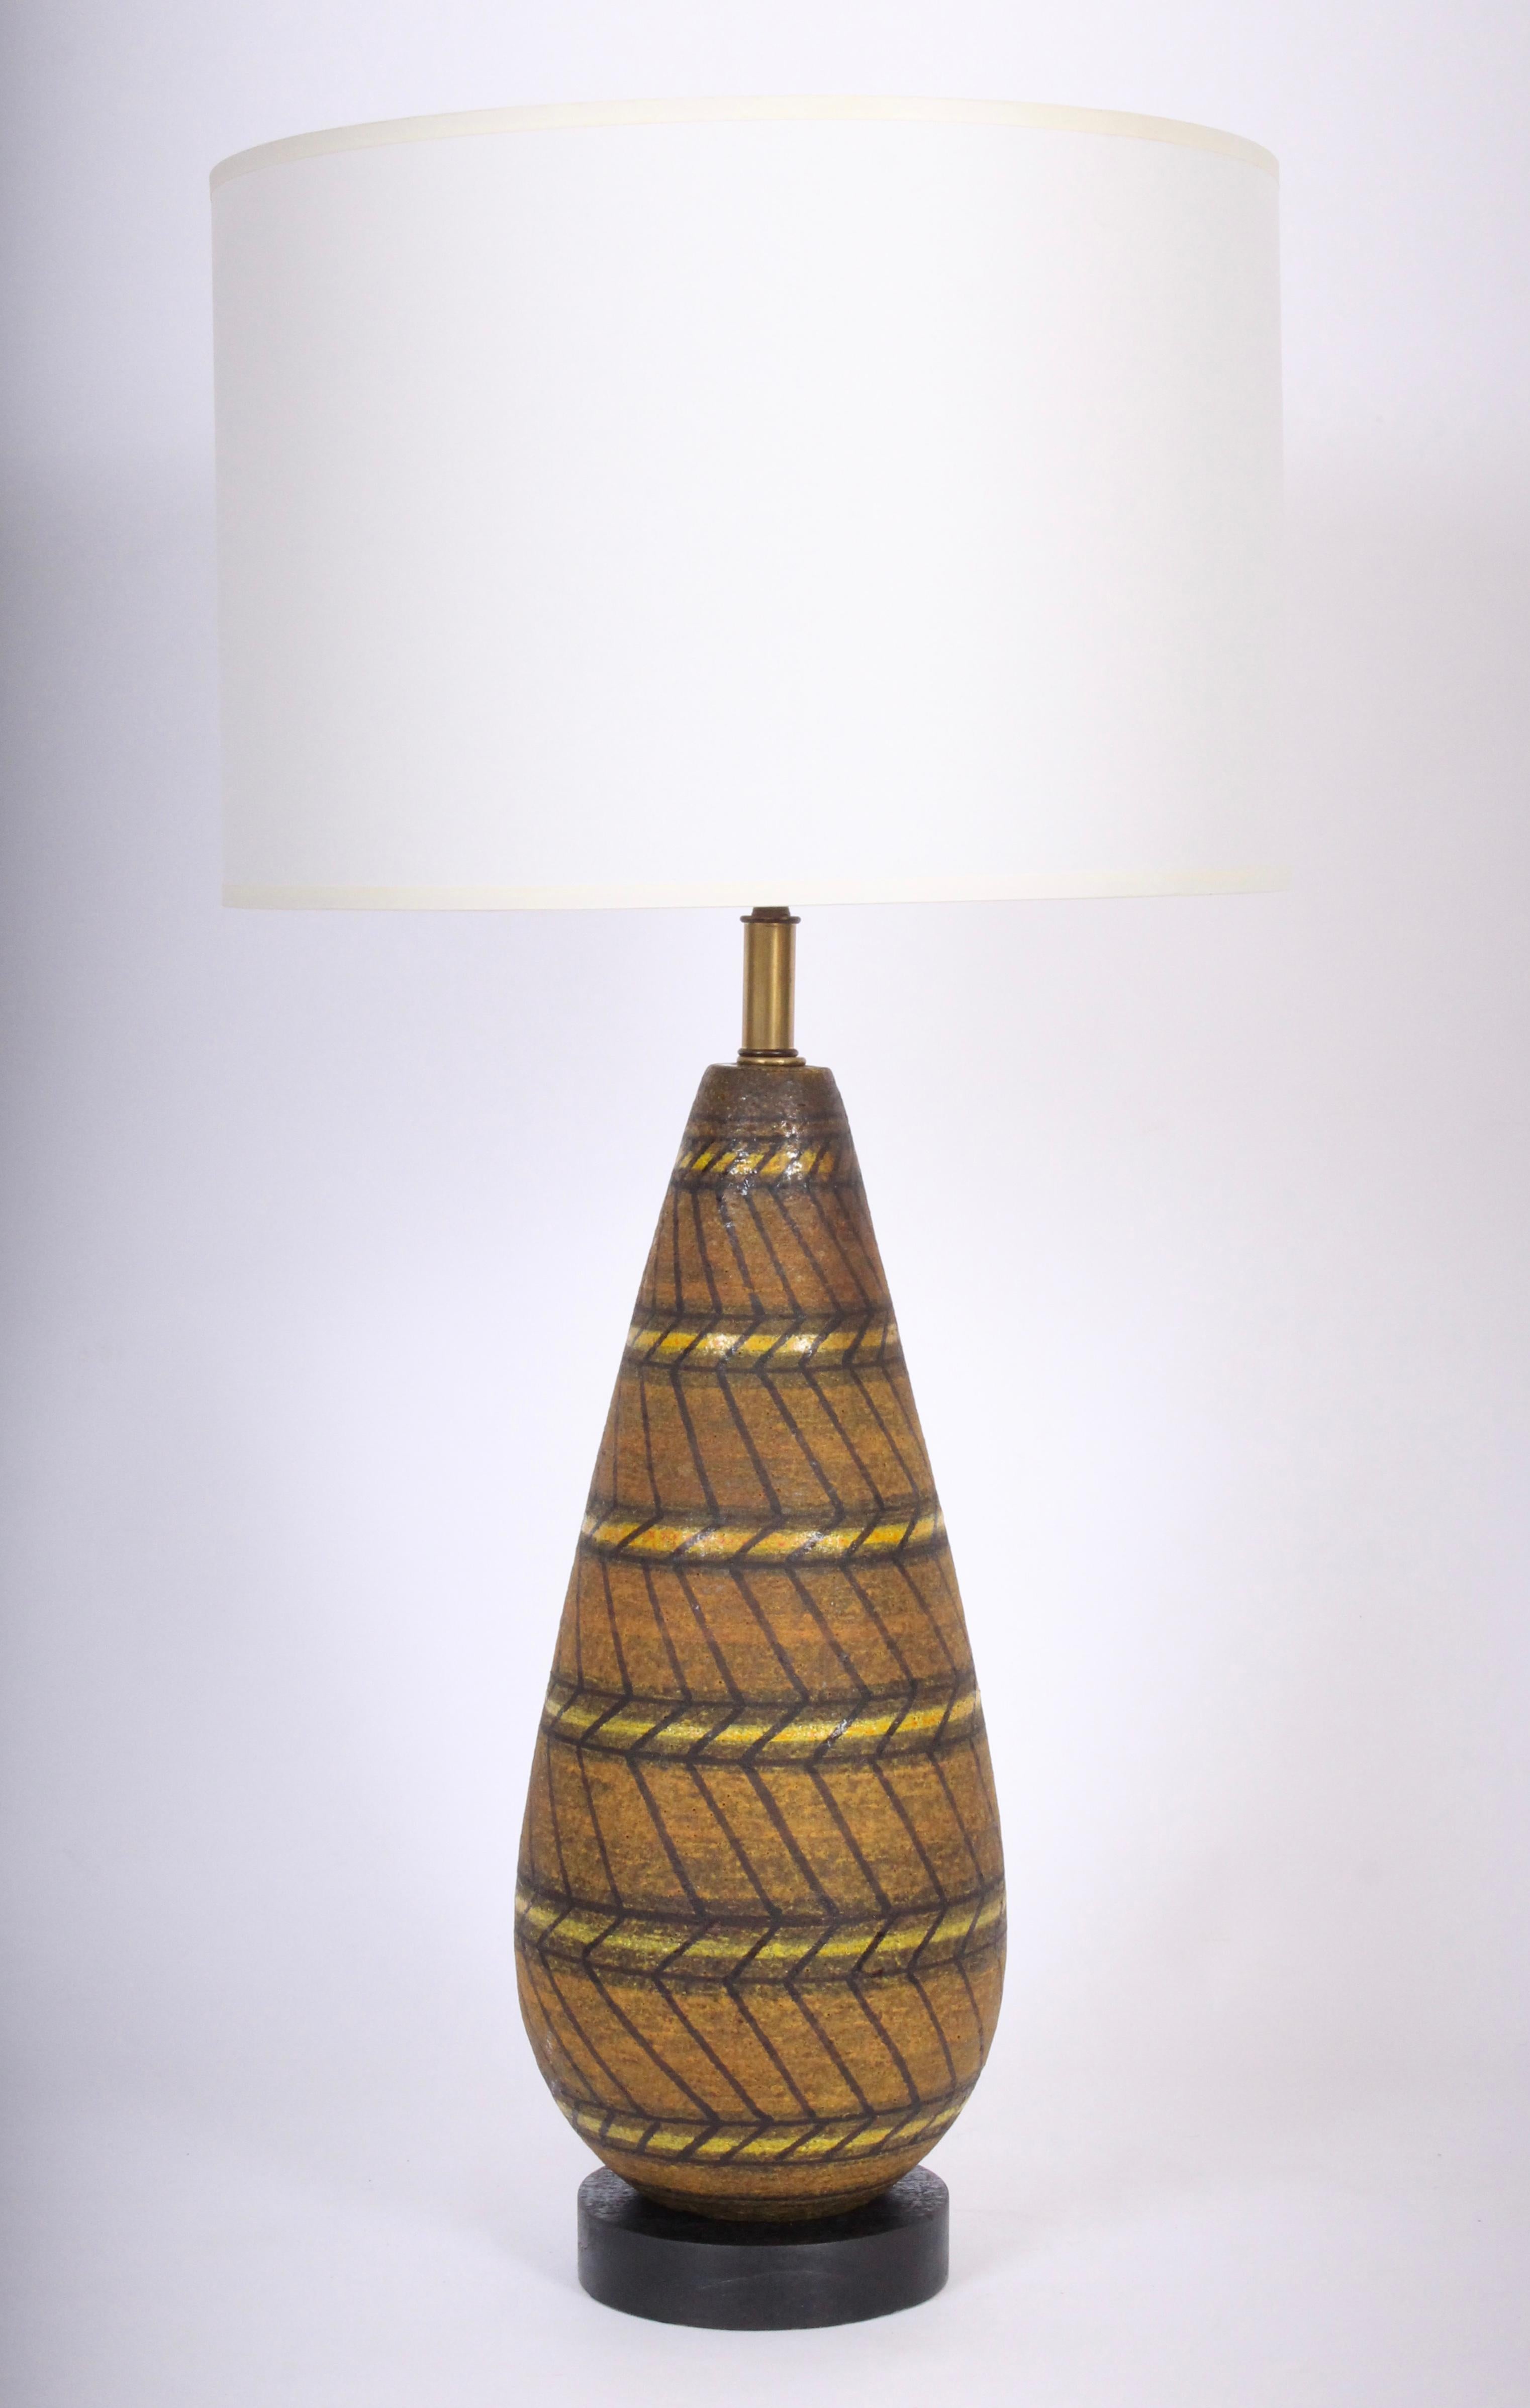 Ceramic Aldo Londi Geometric Cocoa Art Pottery Table Lamp Hand Painted in Yellow, 1950s For Sale